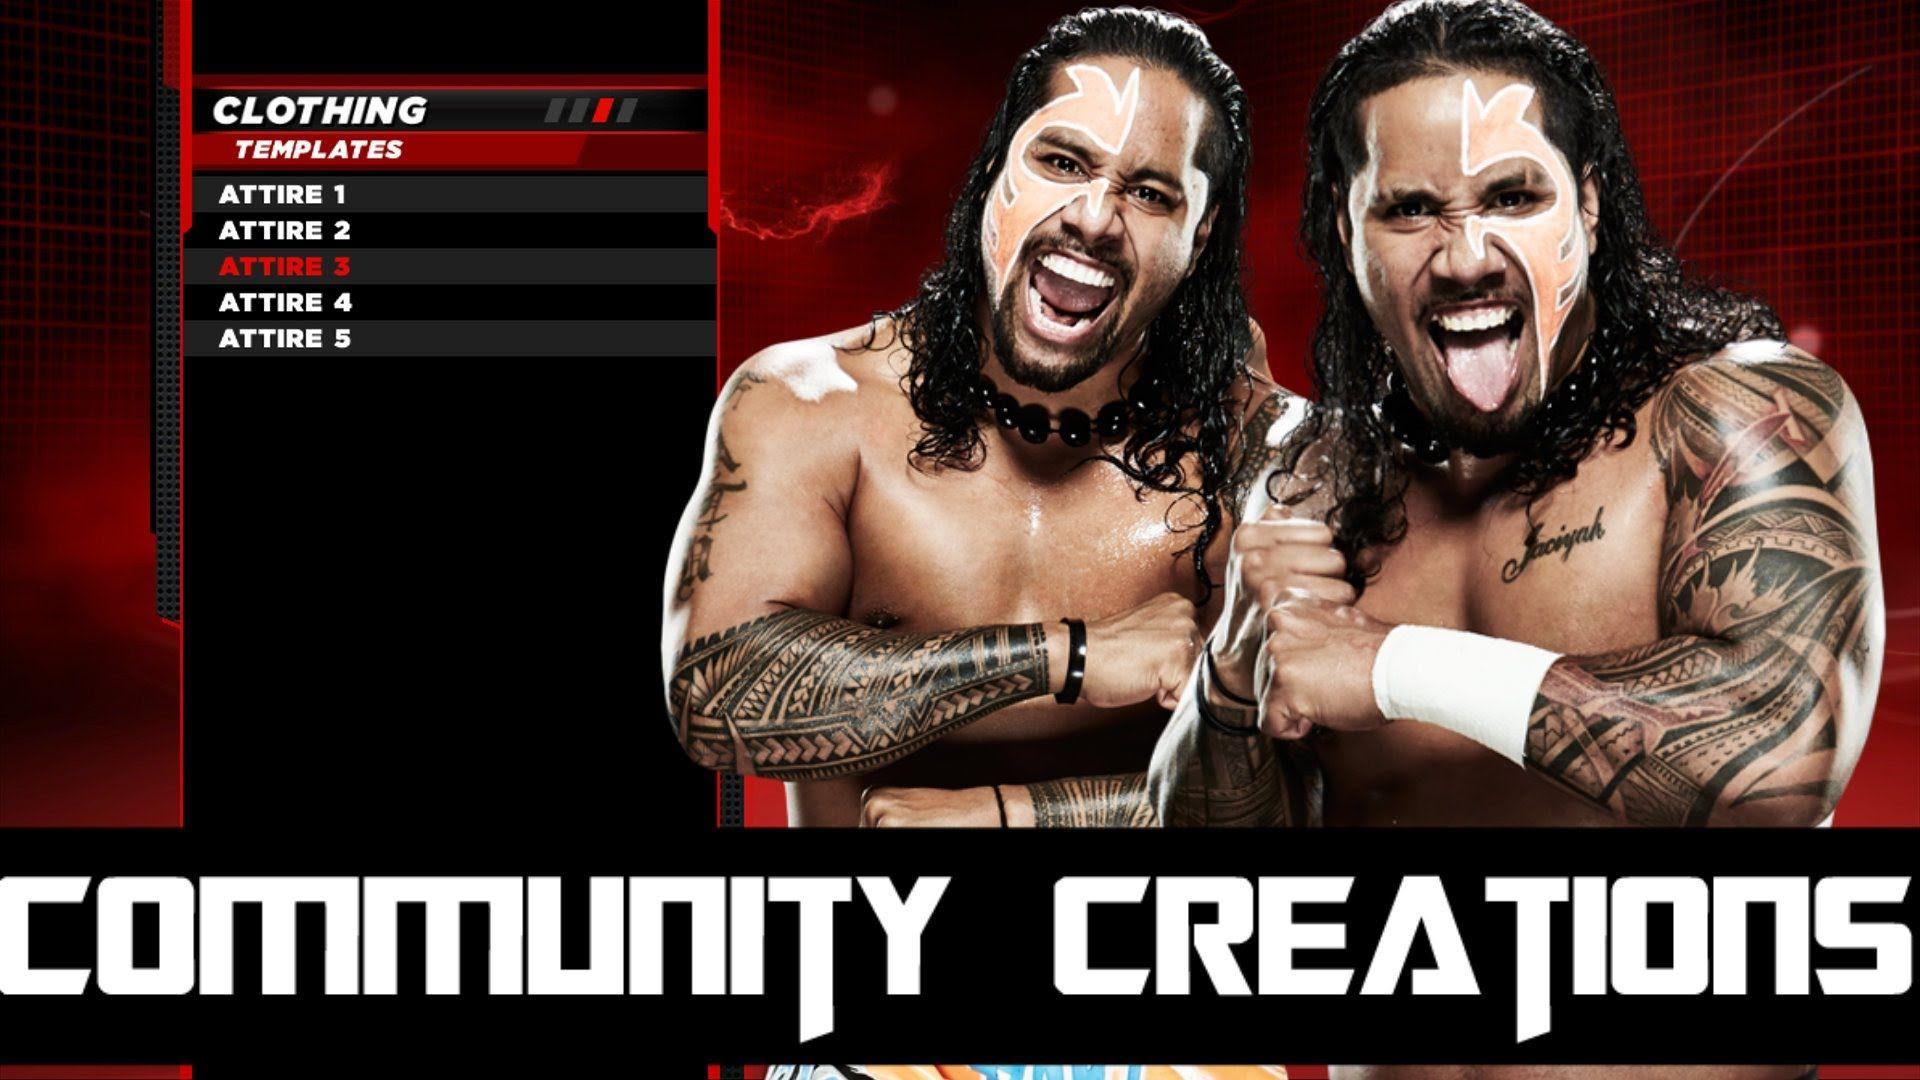 WWE 2K14 Jimmy & Jey, The Usos Make Their Way To The Ring